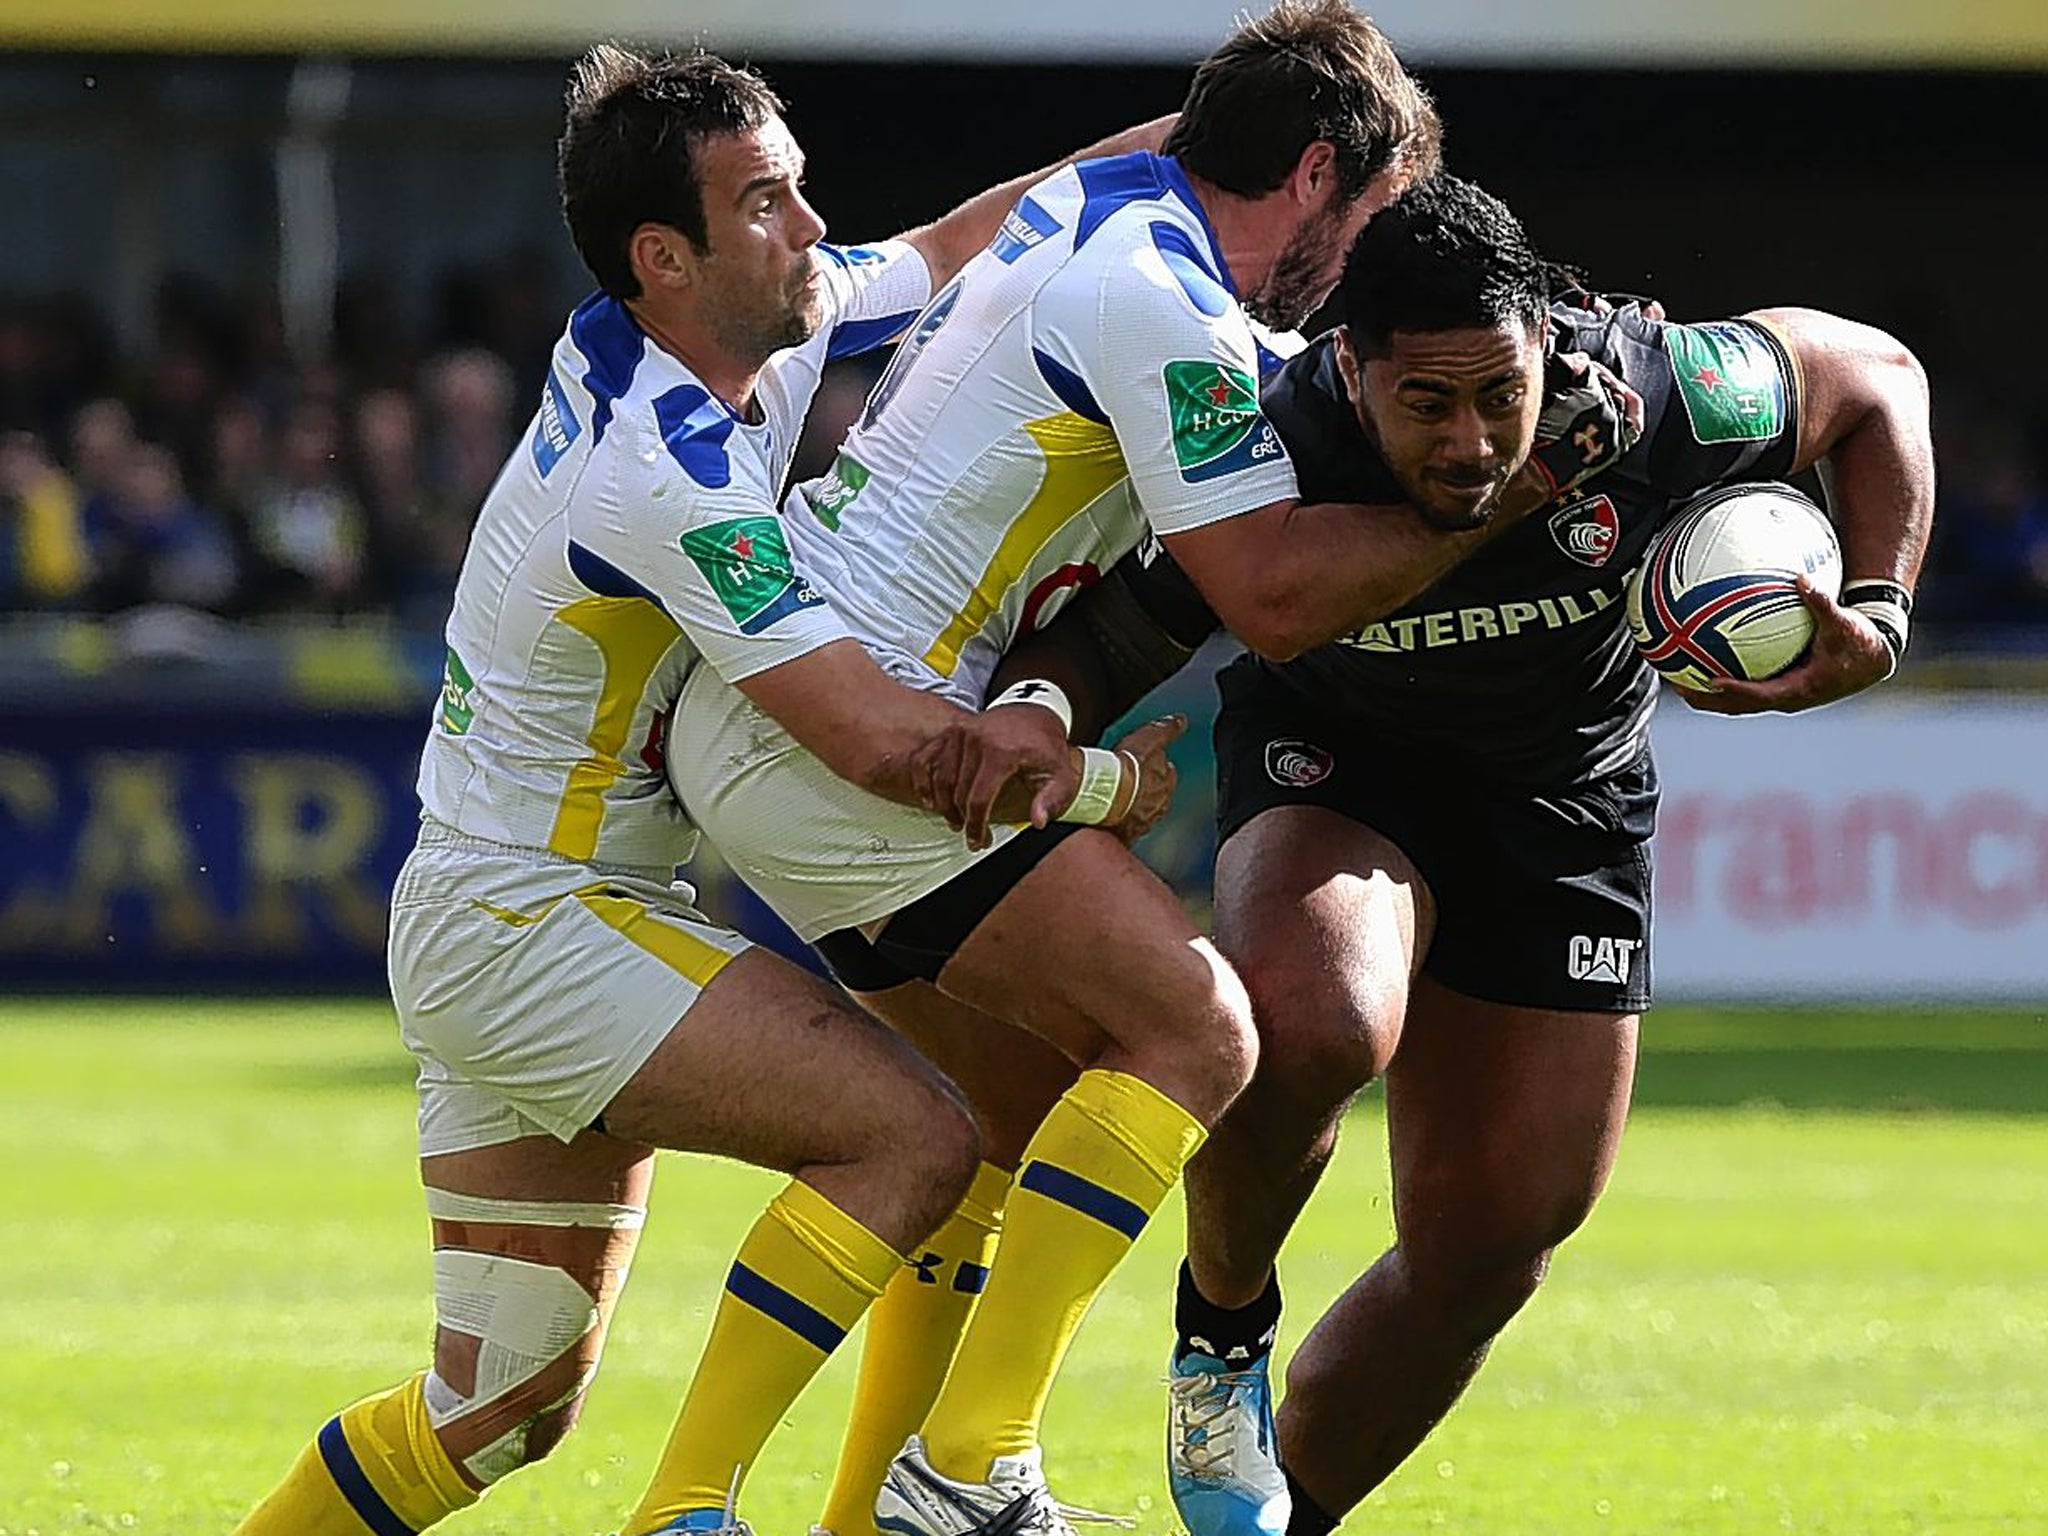 Manu Tuilagi attempts to break through the Clermont Auvergne defence